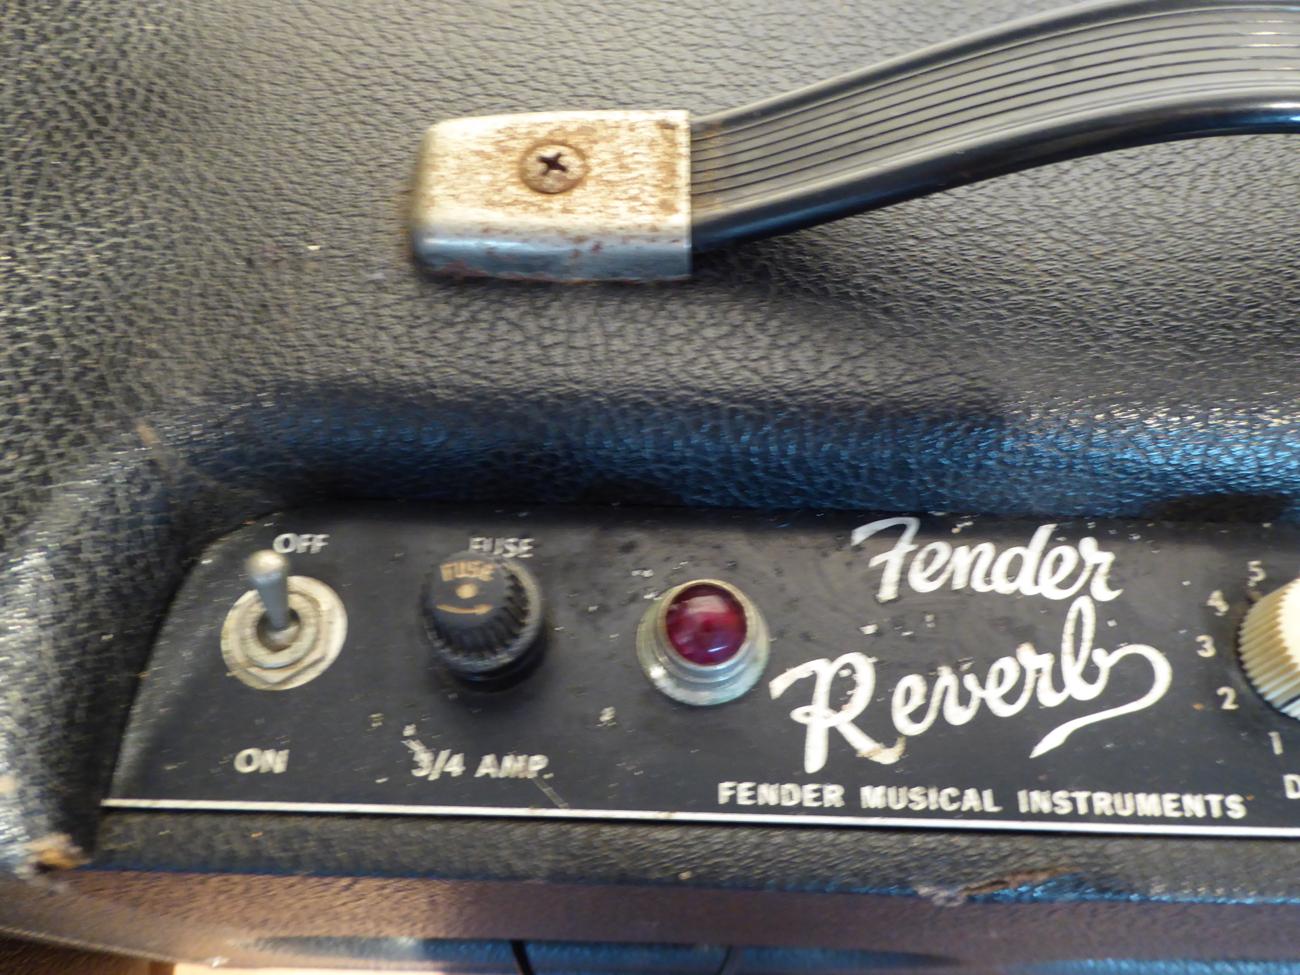 Fender Blackface Reverb Amp Unit, made in U.S.A. - Image 3 of 5